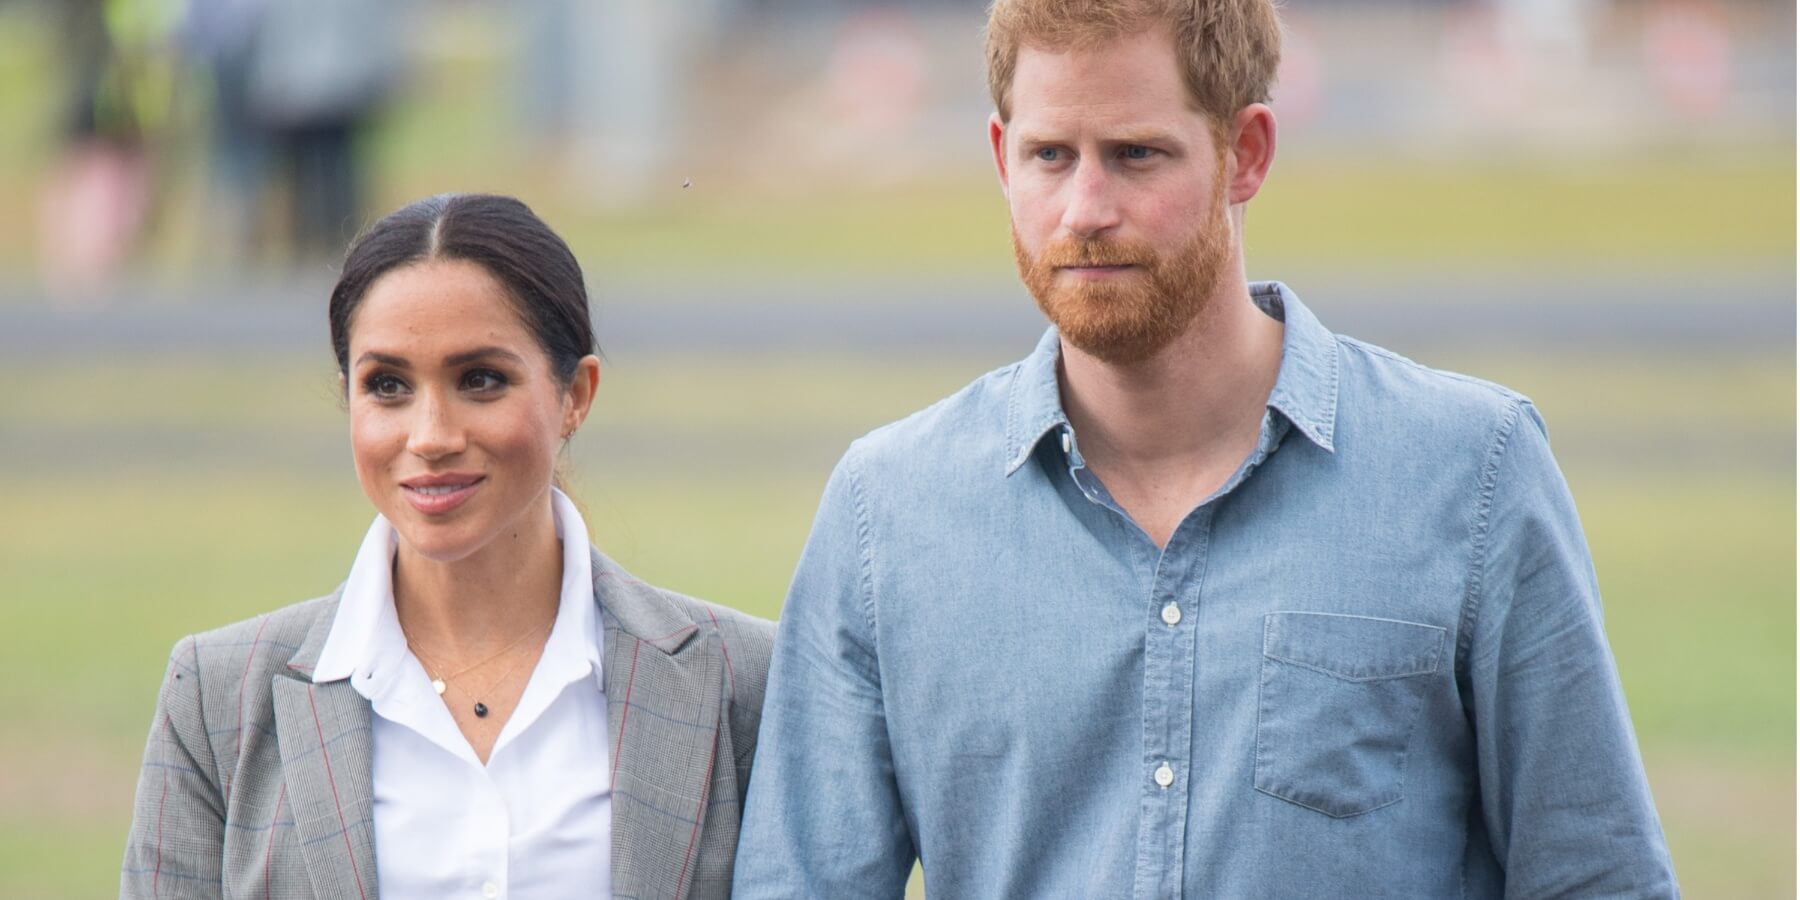 Meghan Markle and Prince Harry attend a naming and unveiling ceremony for the new Royal Flying Doctor Service aircraft at Dubbo Airport on October 17, 2018 in Dubbo, Australia.